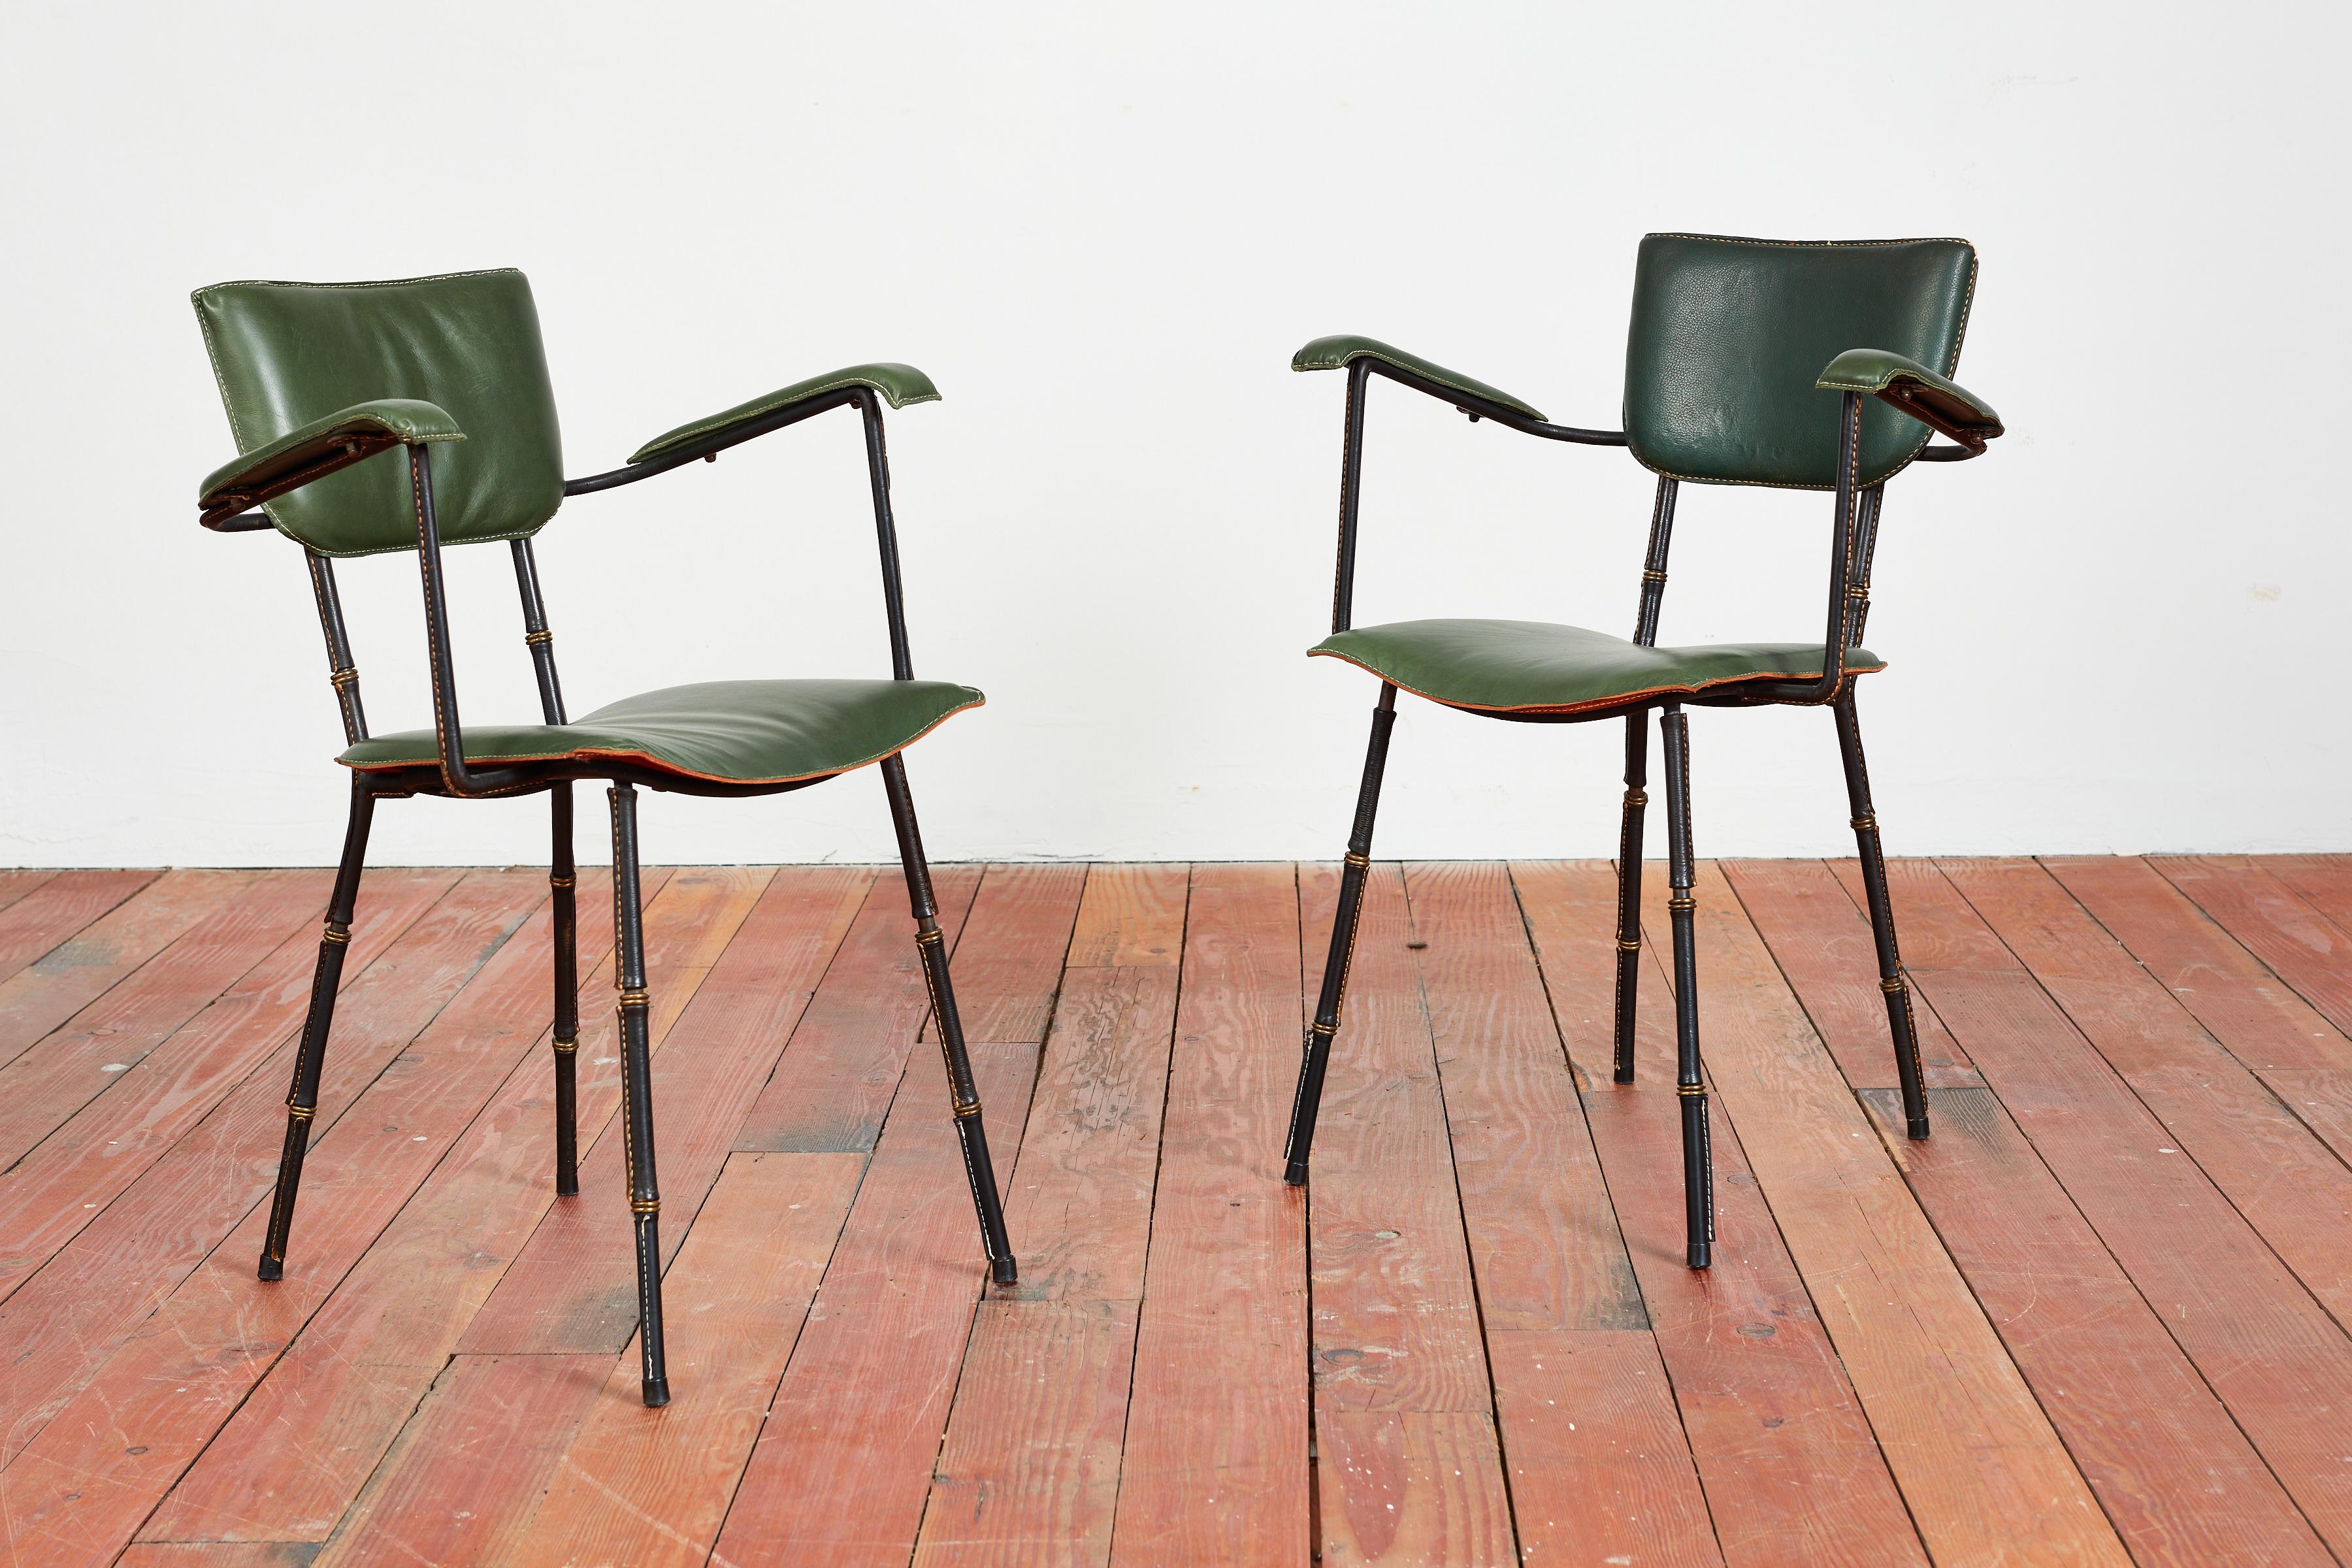 Rare Pair of Jacques Adnet Armchairs with fantstic original green leather and signature contrast stitching. 

Leather bamboo legs with brass accents. 

France 1940's.